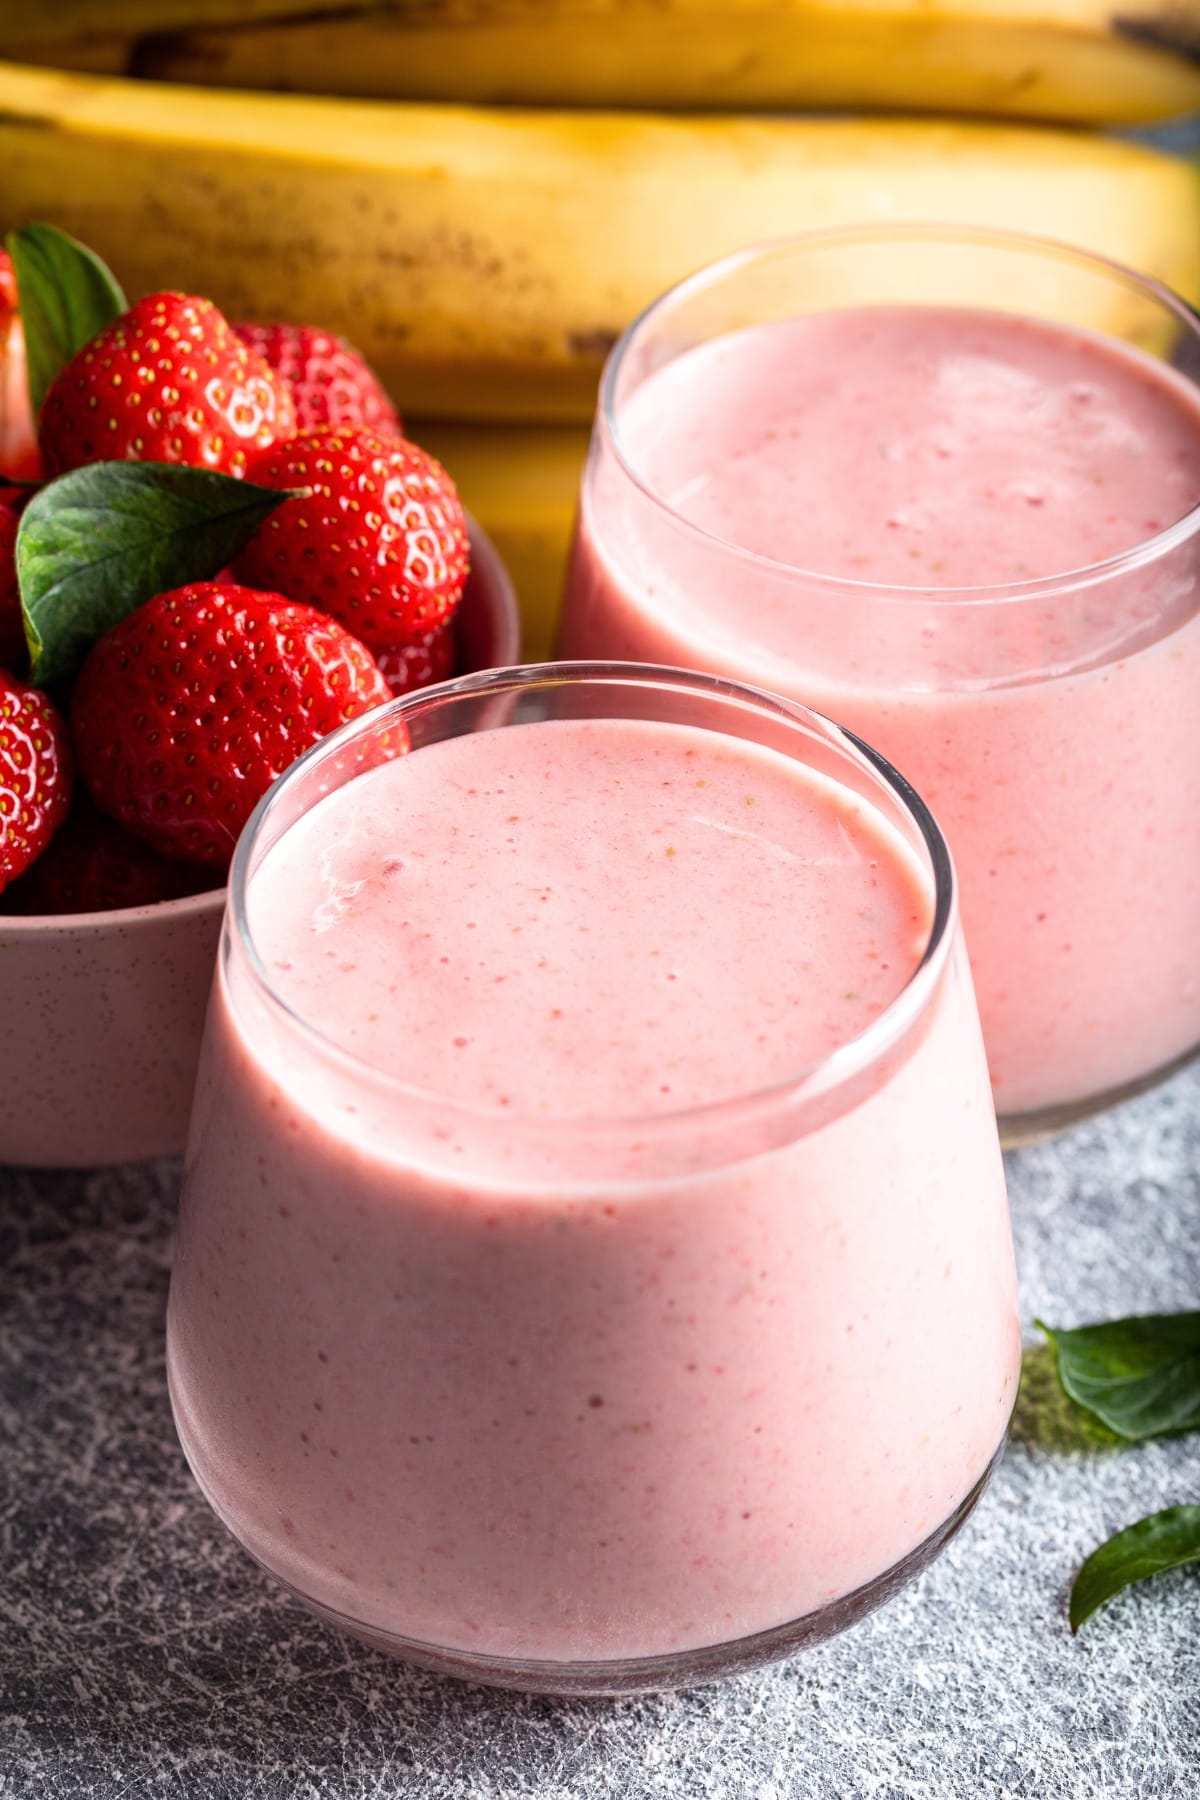 Strawberry Smoothie (Quick and Easy Recipe) featuring Two Glasses of Homemade Healthy Strawberry Smoothies and a Bowl of Fresh Strawberries